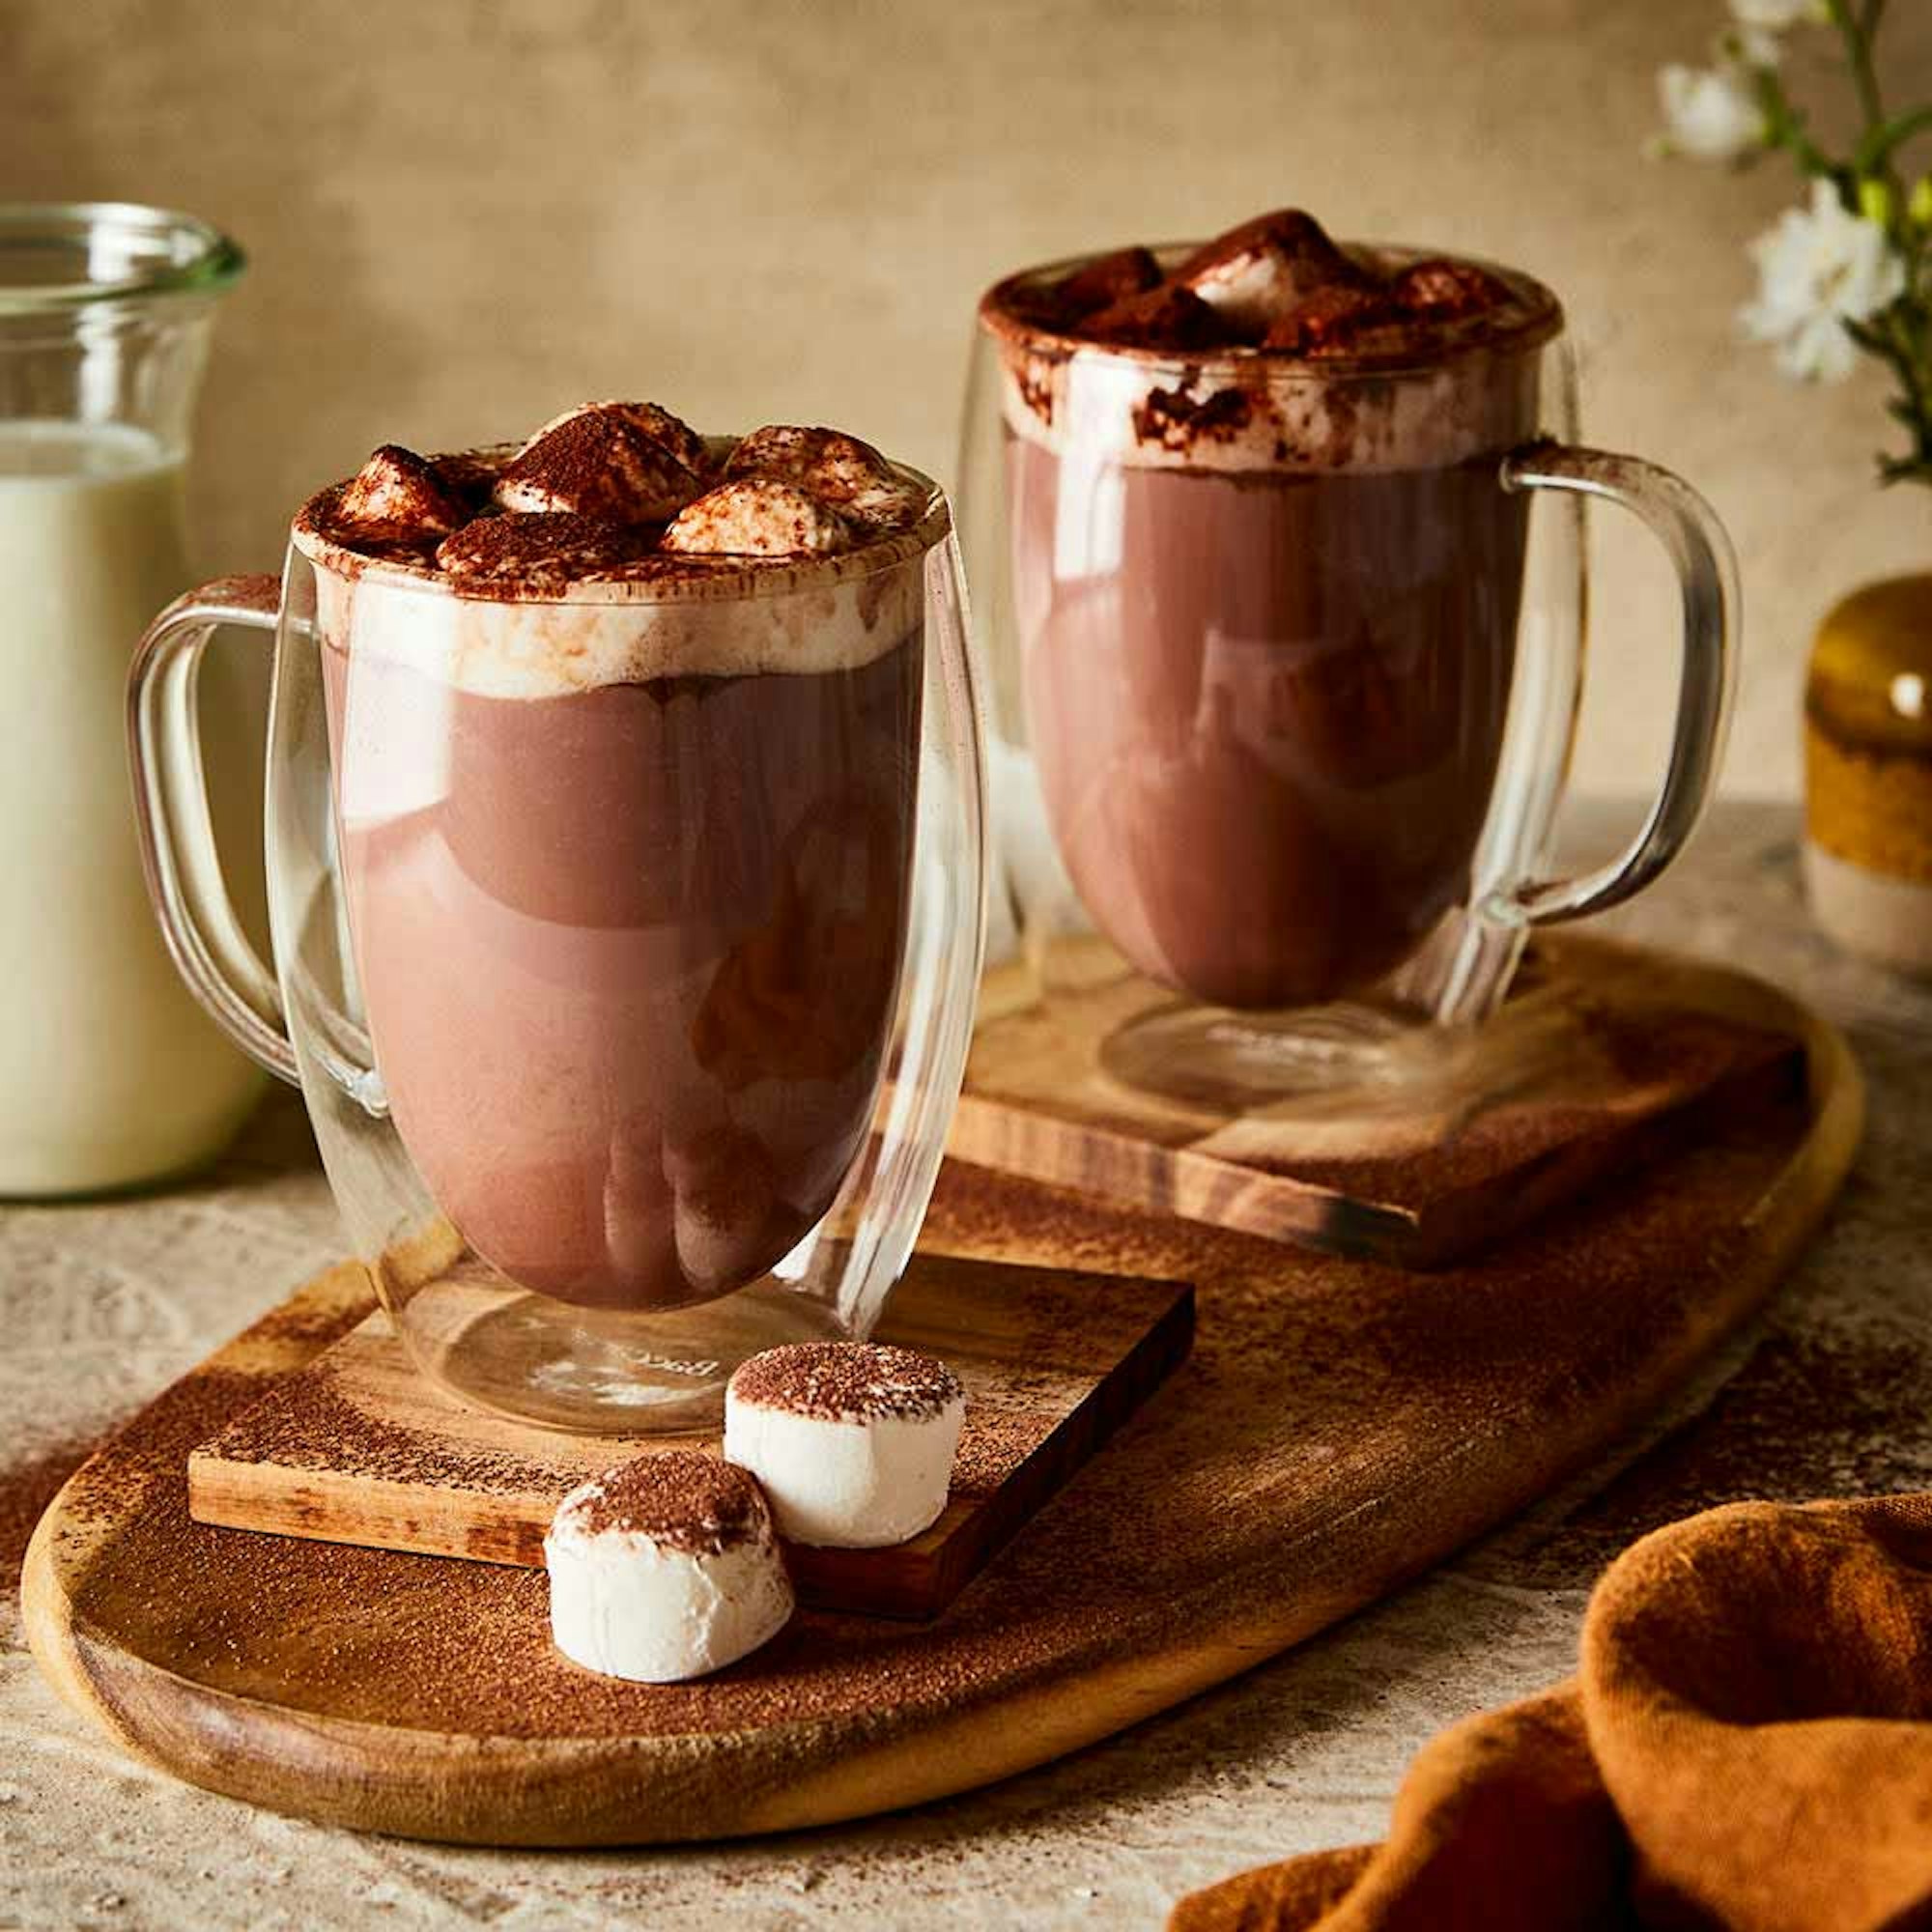 Slow Cooker Spicy Hot Chocolate recipe | Baccarat The Tasty Chef 6L Slow Cooker